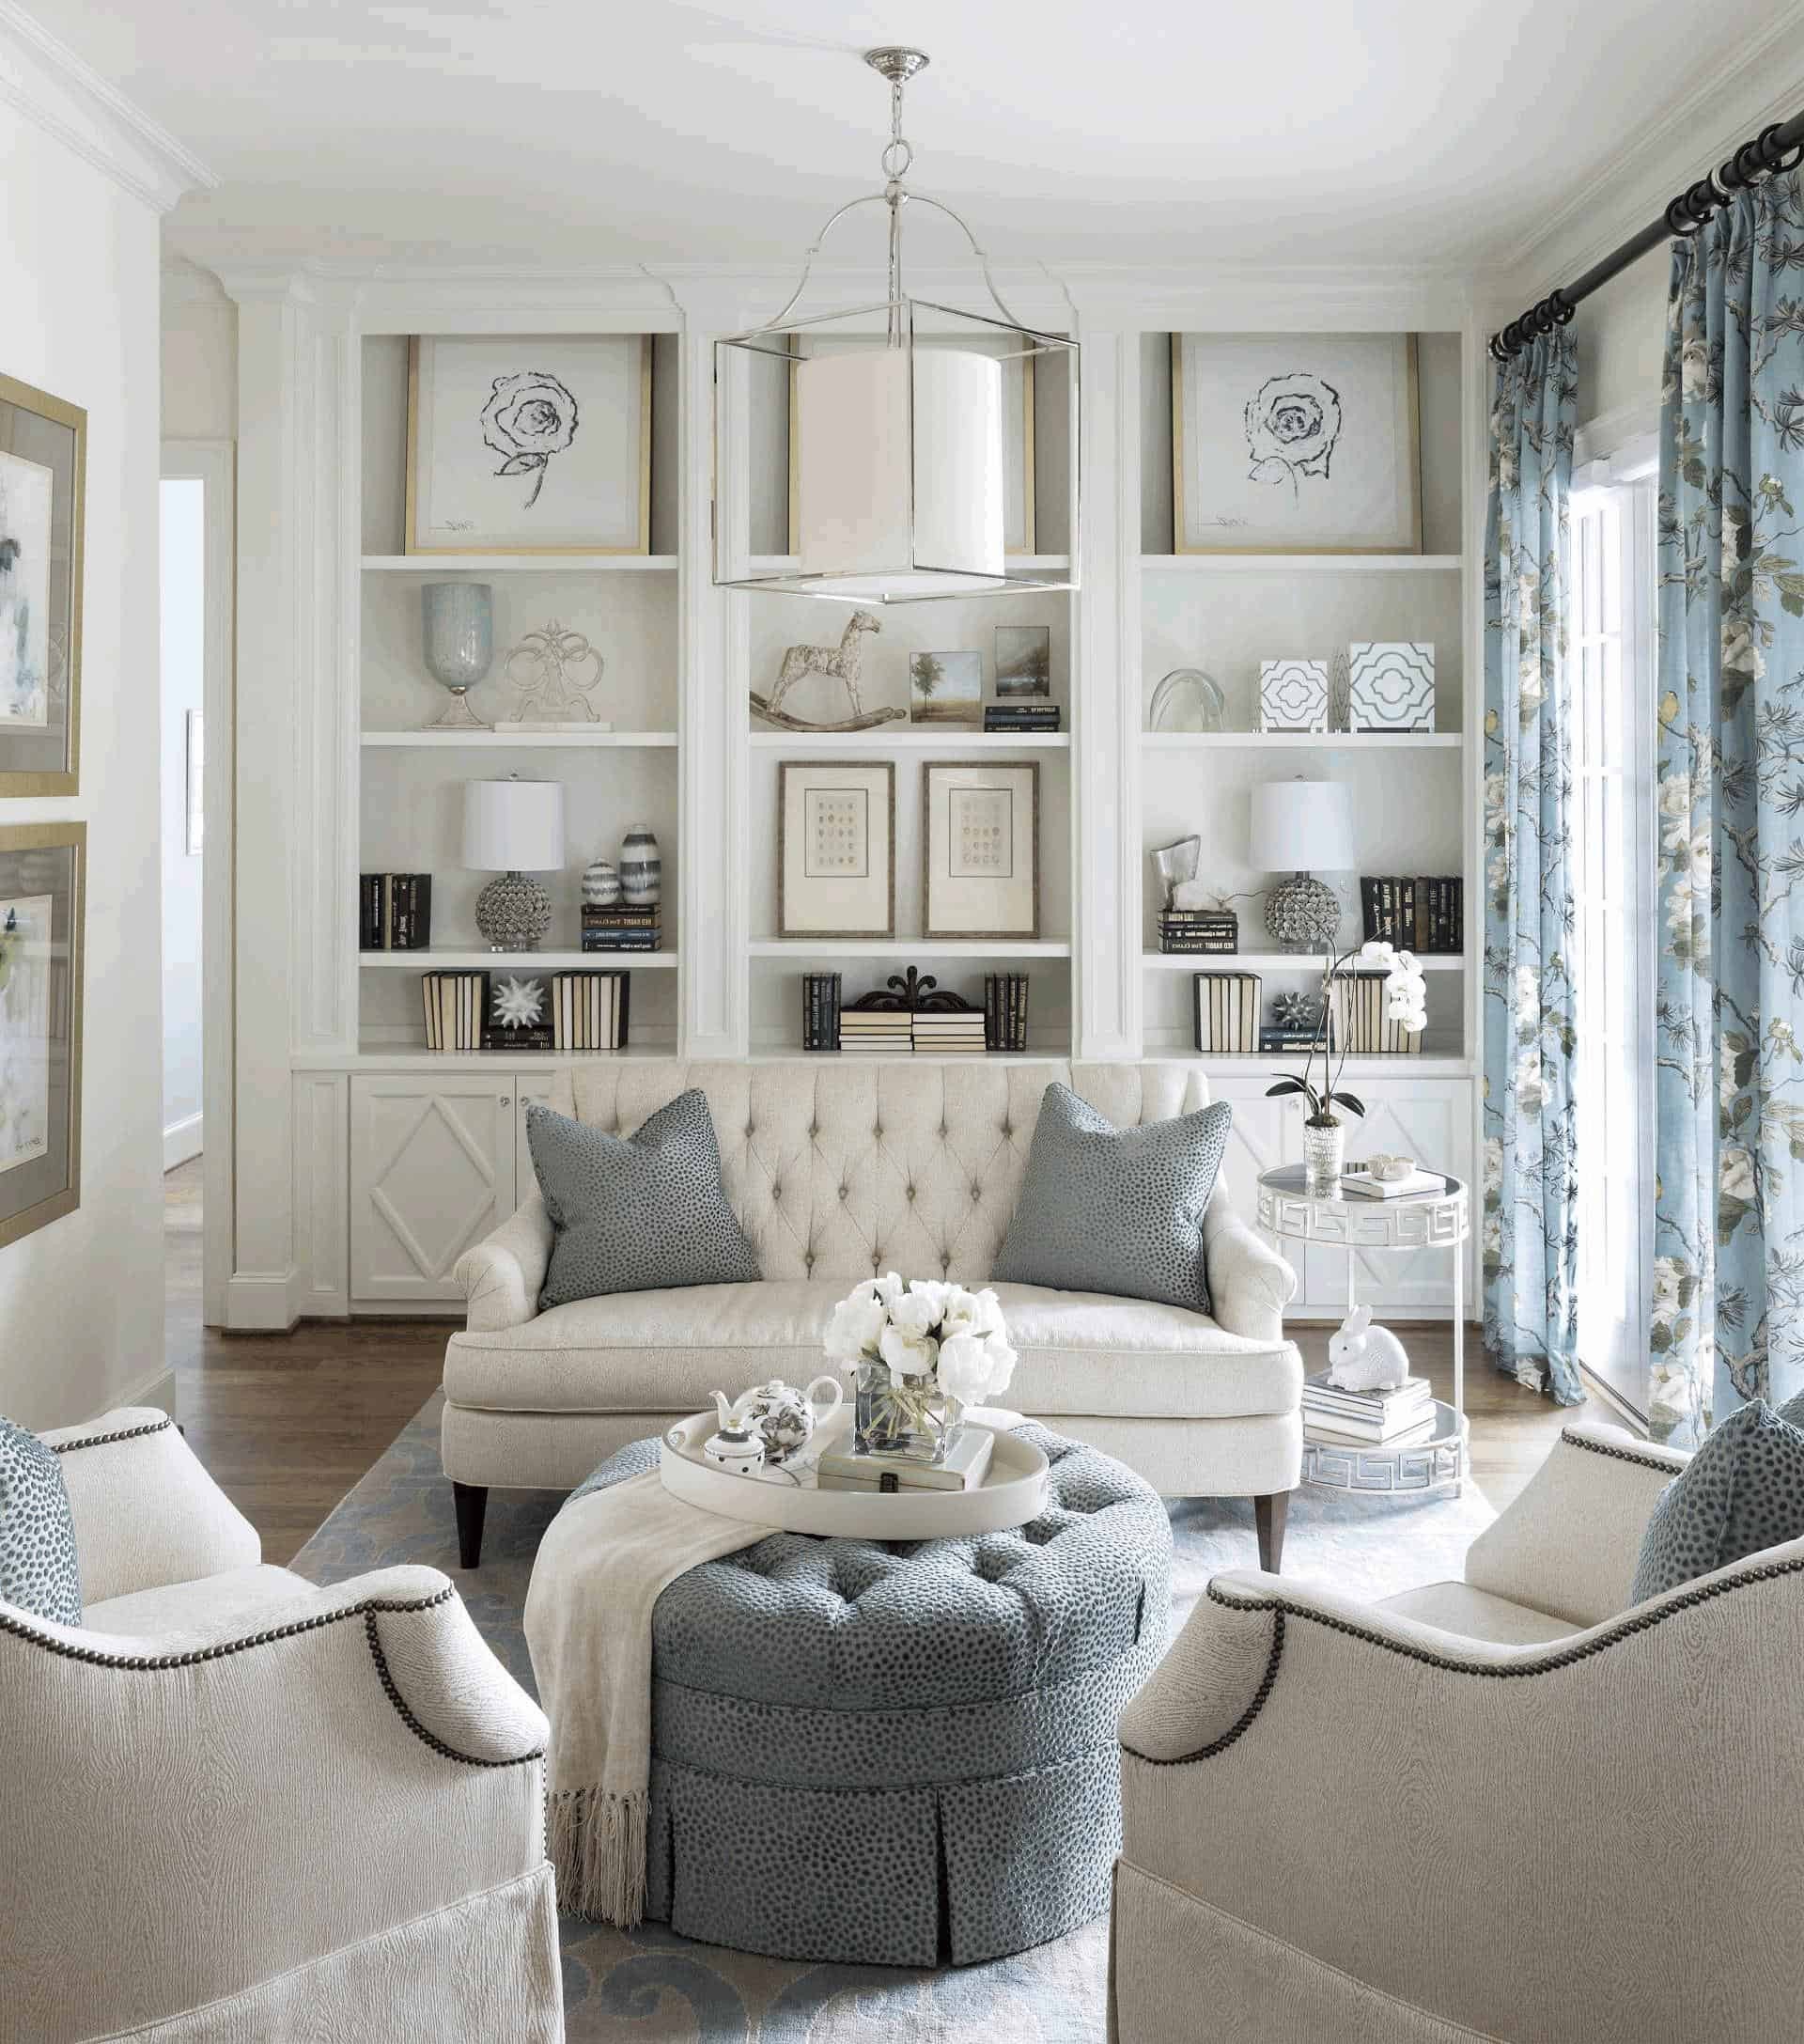 Living Room Furniture Ideas Unique 12 Lovely White Living Room Furniture Ideas